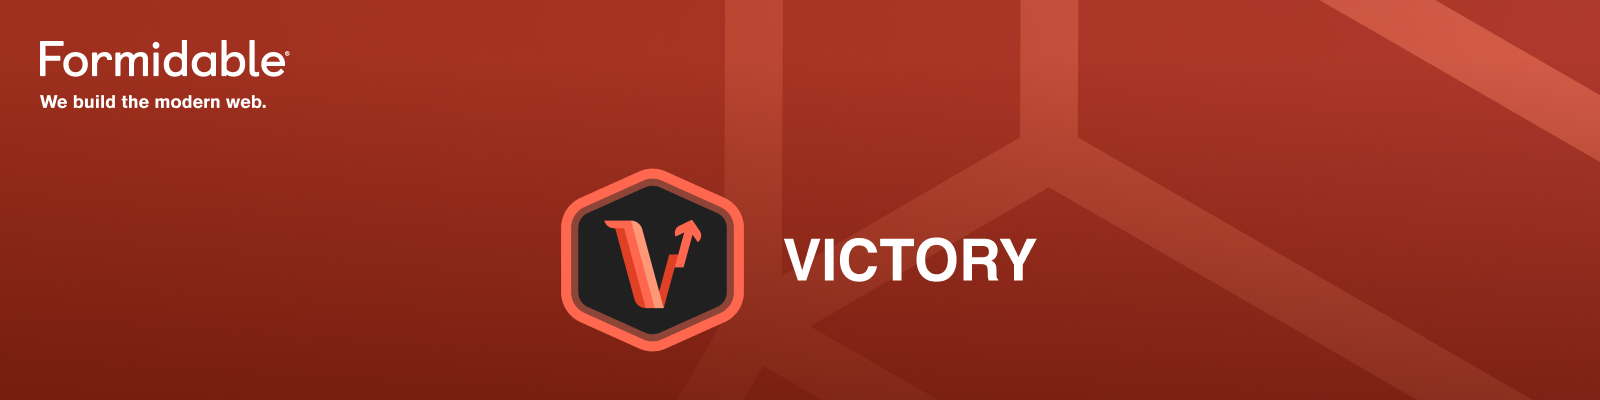 Victory — Formidable, We build the modern web